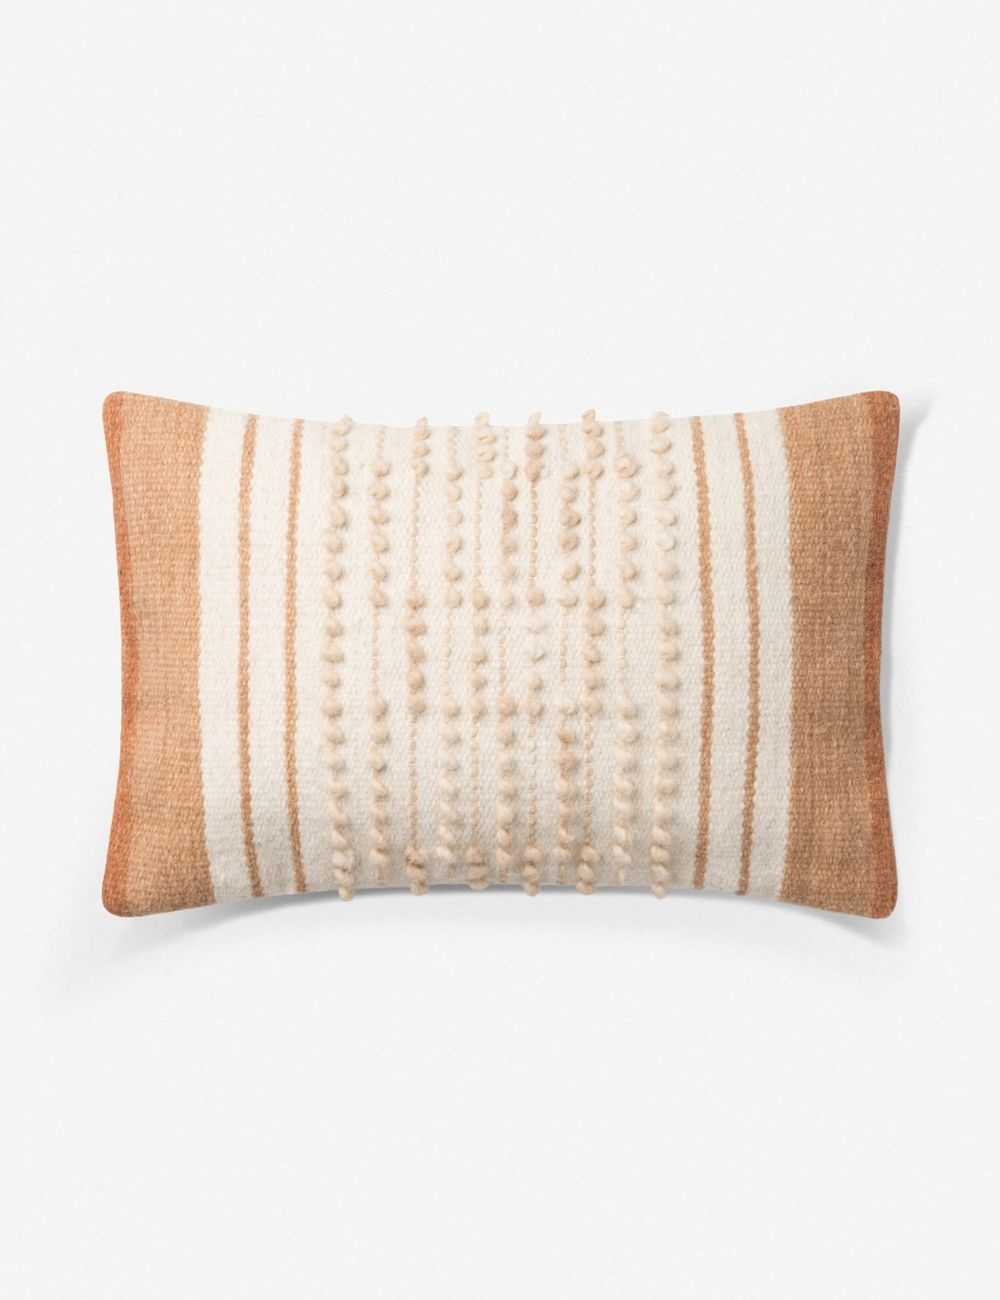 OISE LUMBAR PILLOW, RUST AND NATURAL, ED ELLEN DEGENERES CRAFTED BY LOLOI WITH DOWN INSERT - Image 0